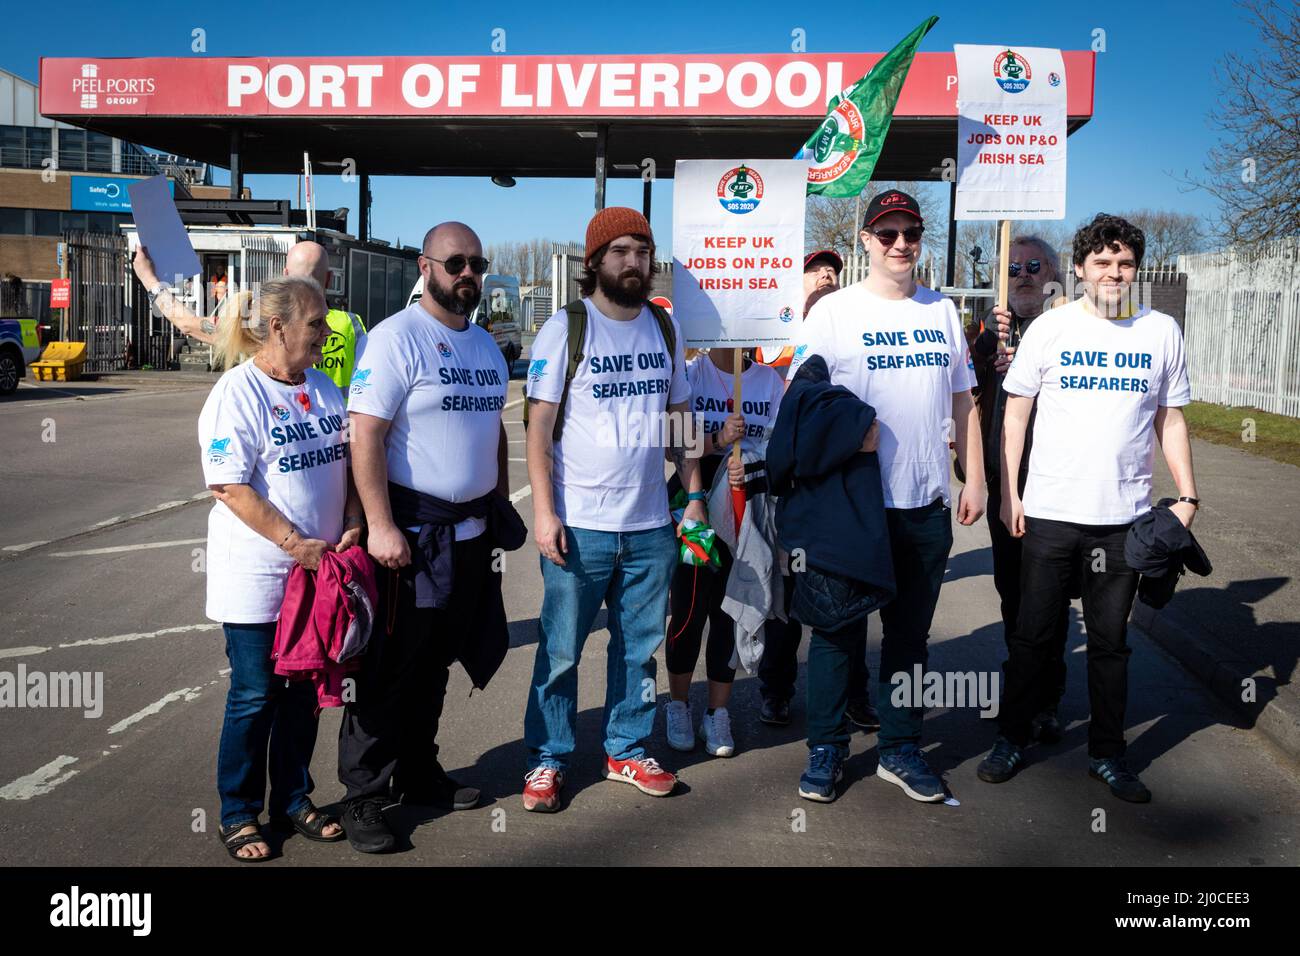 Liverpool, UK. 18th Mar, 2022. A group of RMT members gather outside the Port Of Liverpool. An emergency protest organisedÊby The Rail, Maritime and Transport workers' Union (RMT), seesÊunion members gather after the news earlier this week that P&O Ferries were terminating 800 employee contracts without any notice. Credit: Andy Barton/Alamy Live News Stock Photo